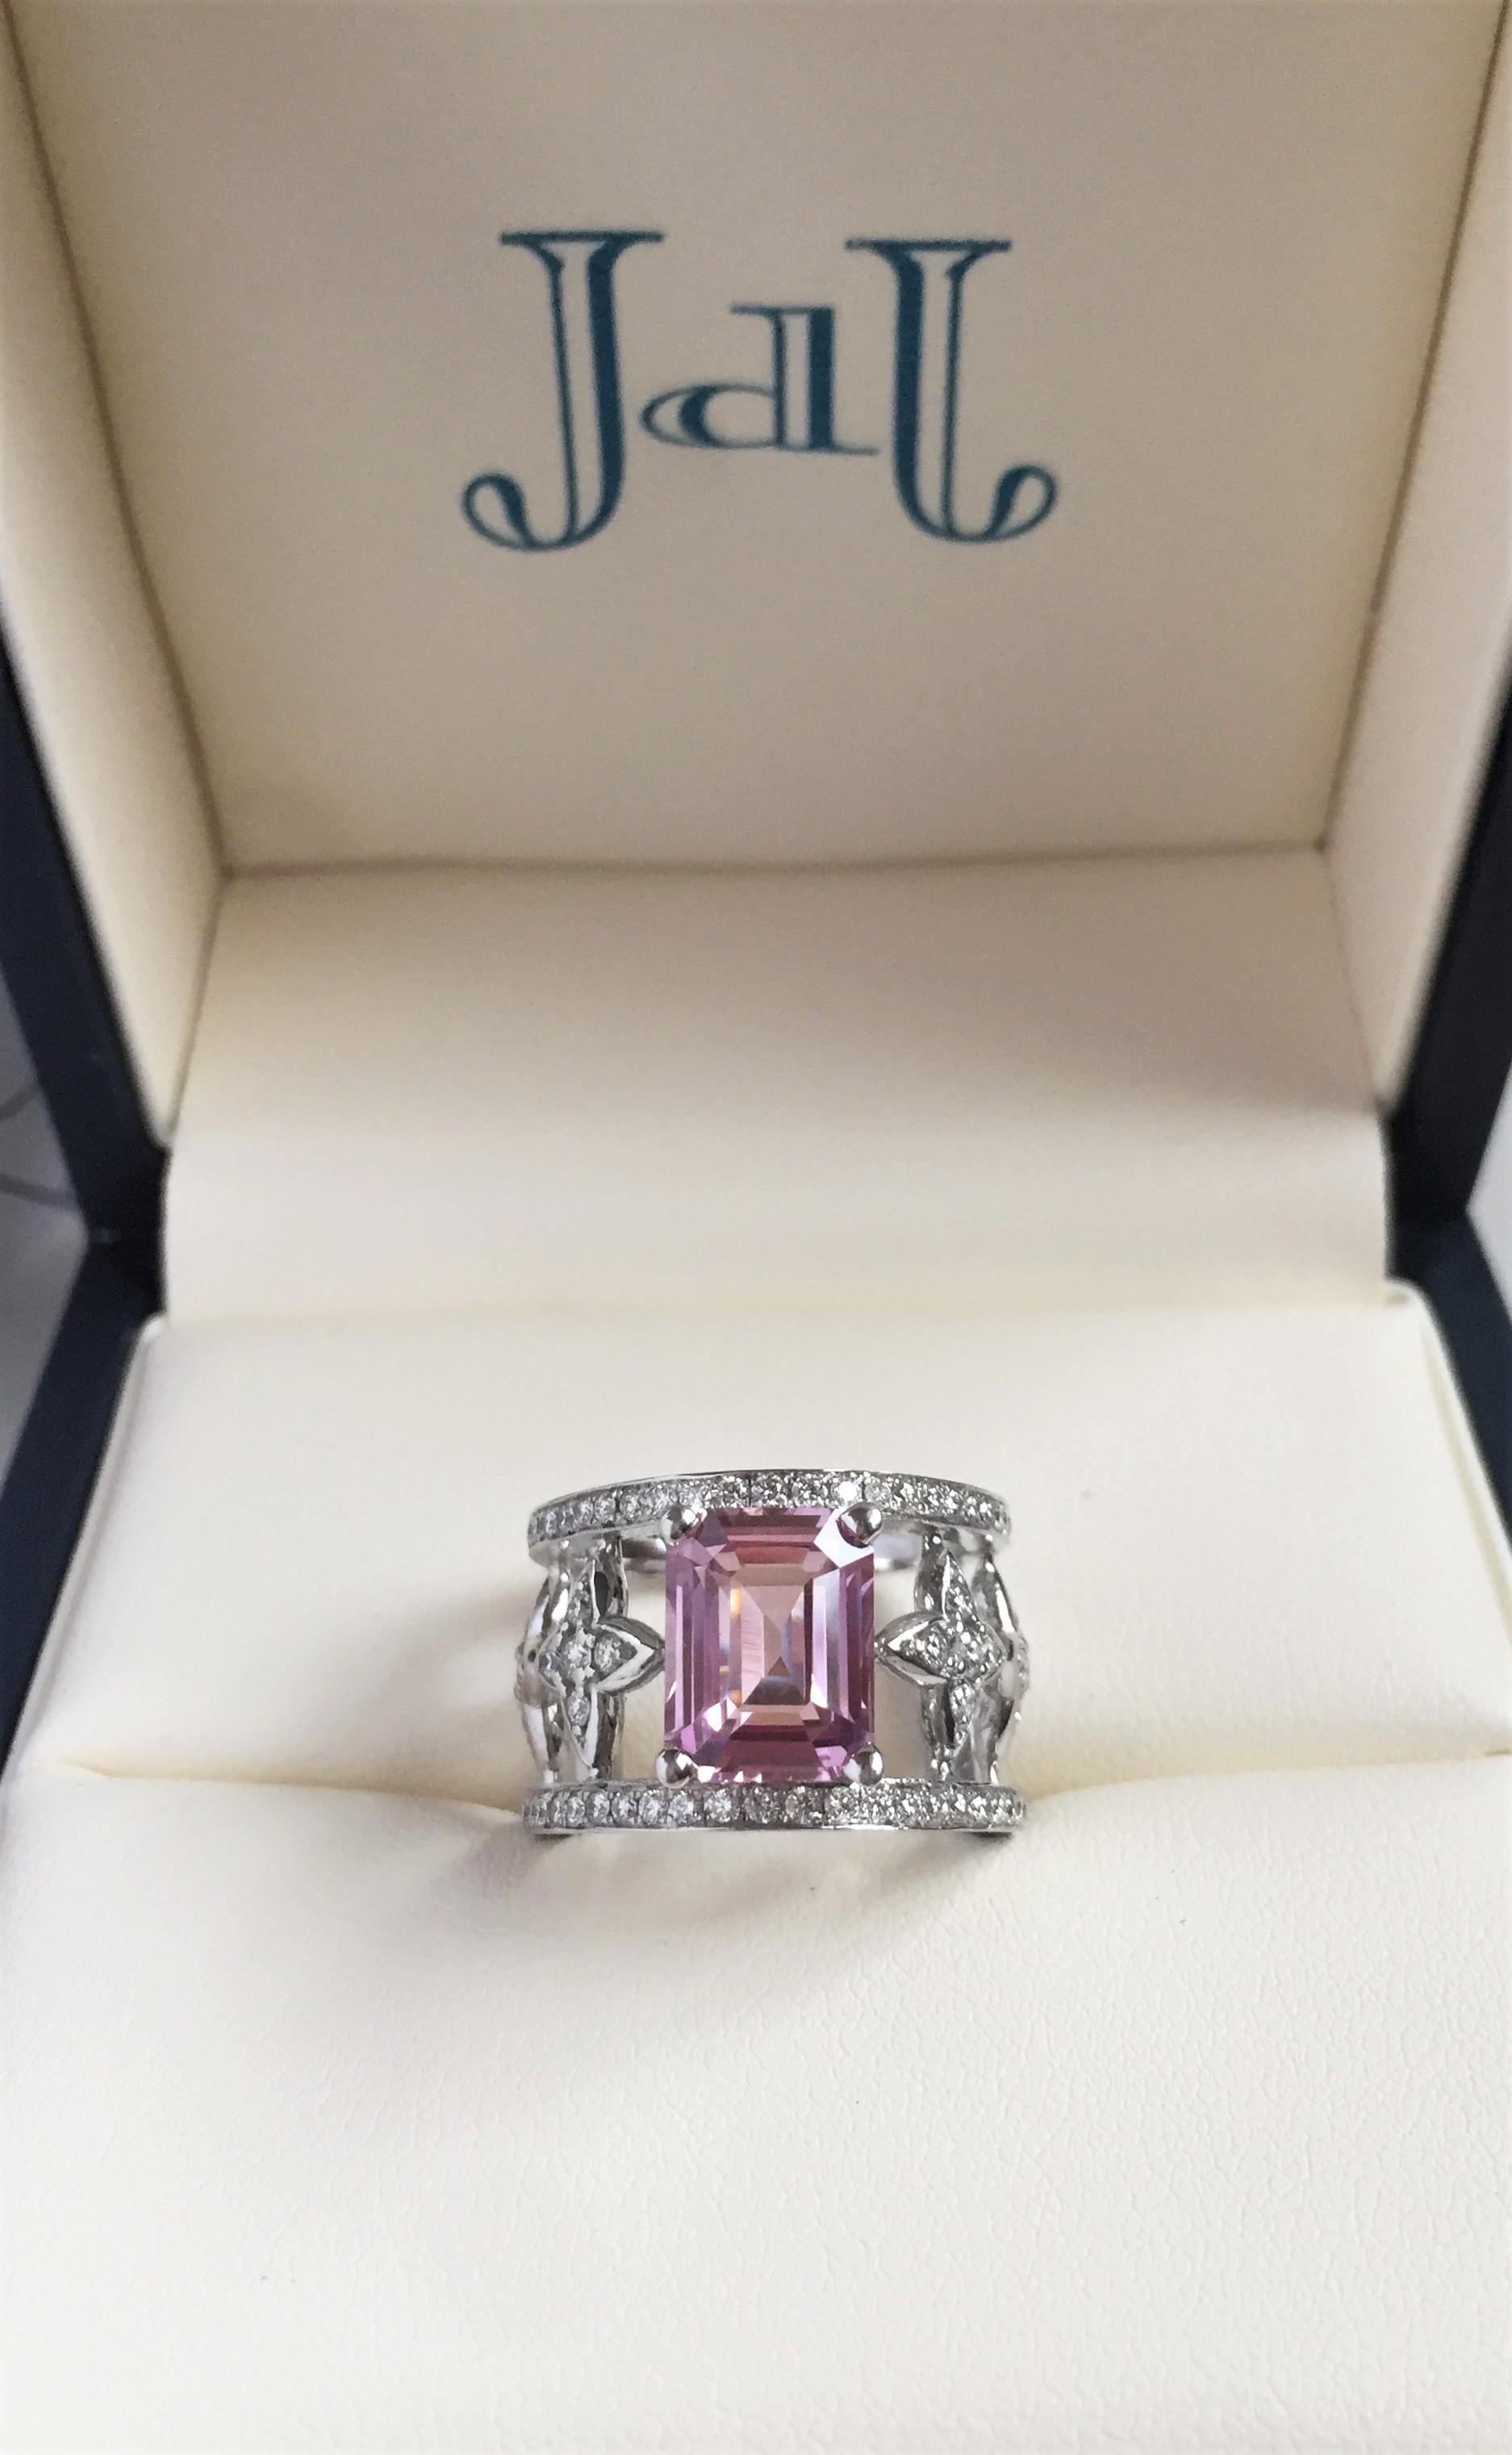 JdJ Couture Emerald Cut Pink Sapphire and Diamond Ring in 18 Karat White Gold 2